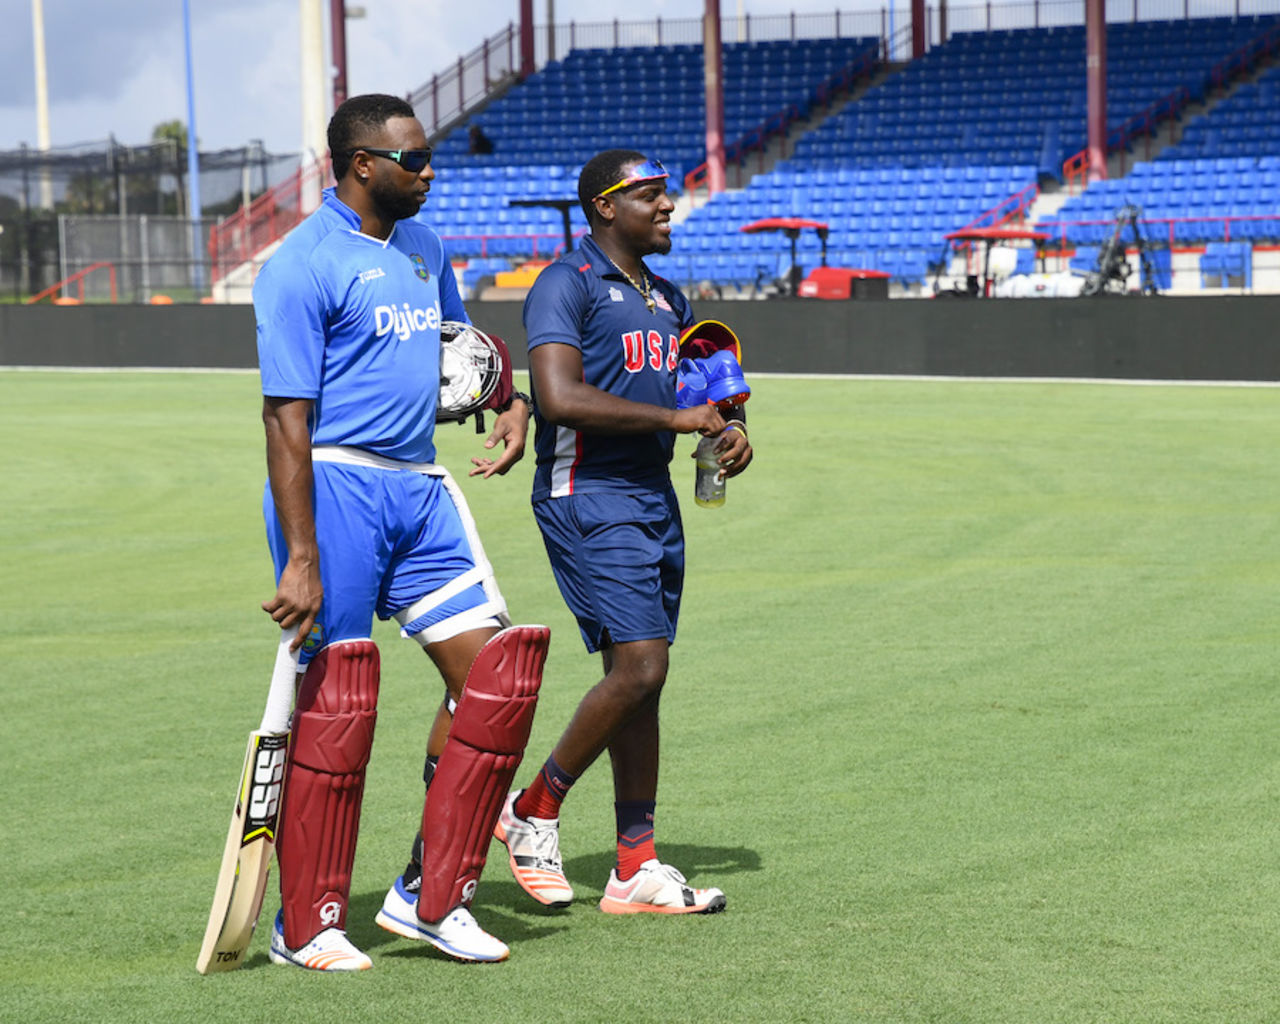 USA batsman Steven Taylor catches up with his Barbados Tridents captain Kieron Pollard in Florida, Lauderhill, August 25, 2016